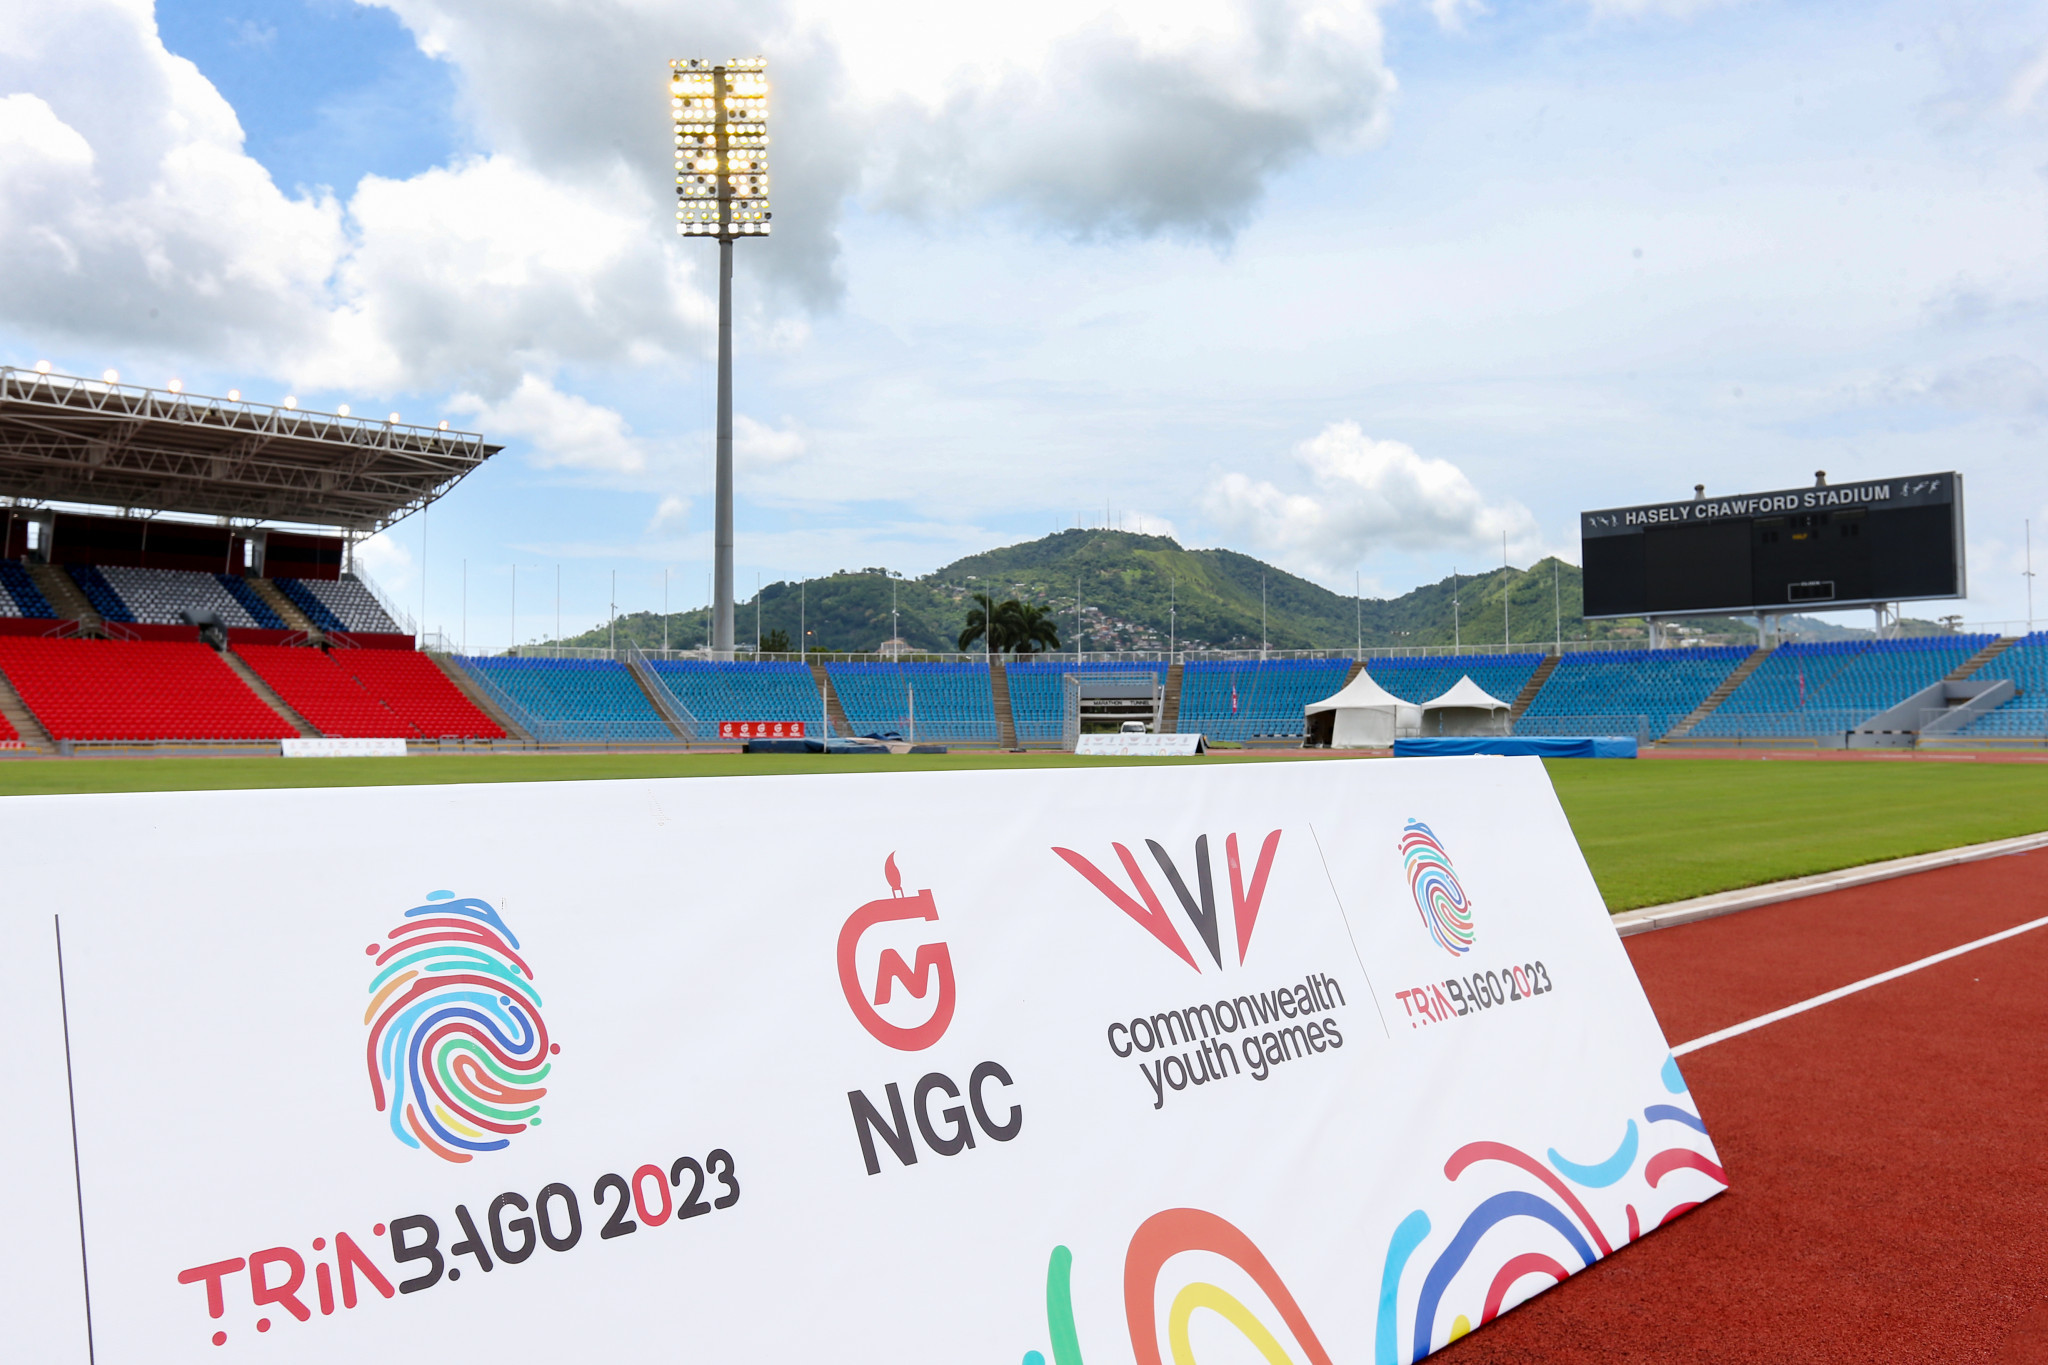 Diane Henderson hopes the Commonwealth Youth Games can bring more sports events to Trinidad and Tobago ©Getty Images